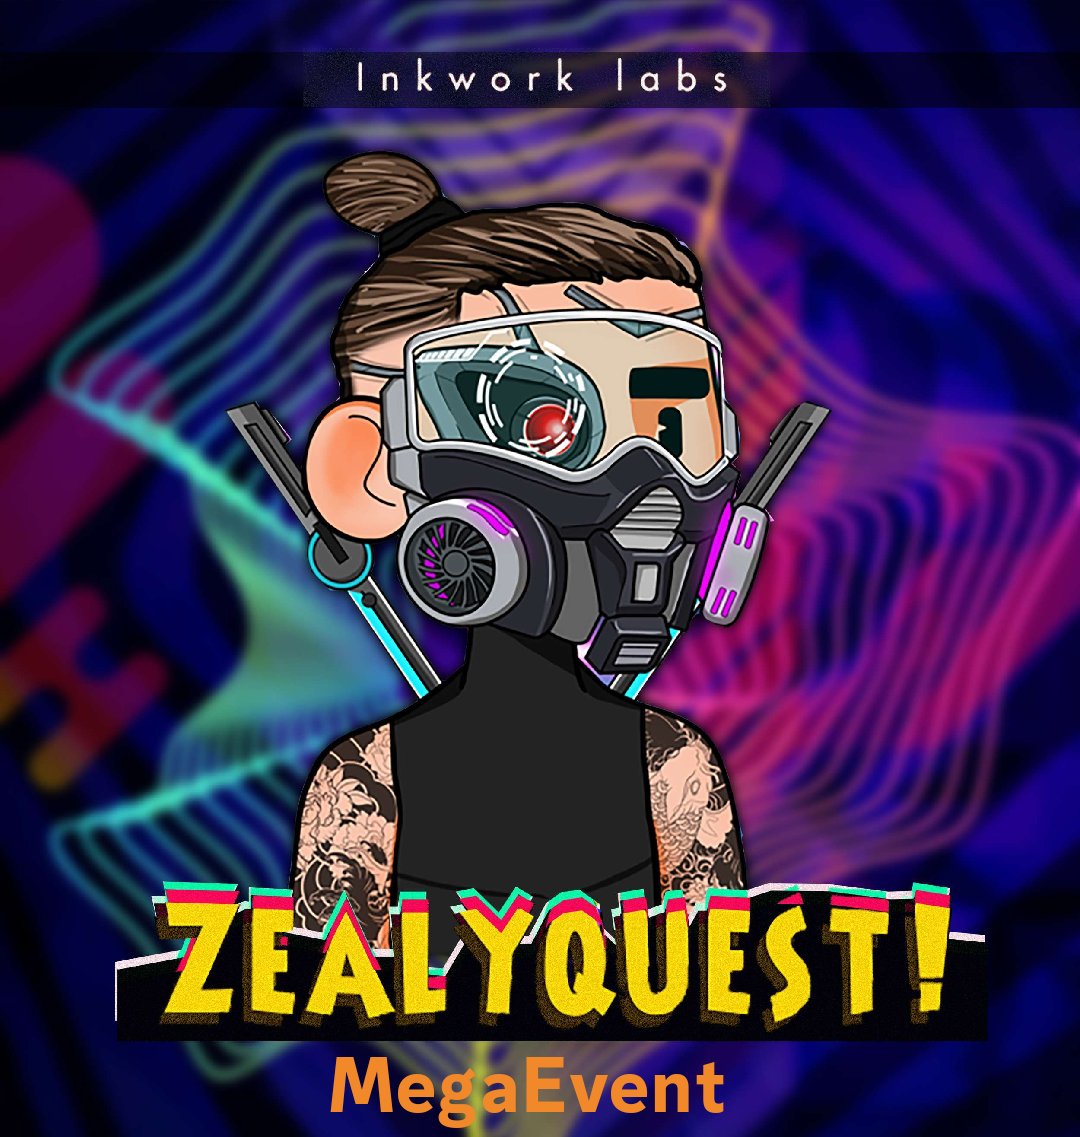 𝗠𝗘𝗚𝗔 𝗘𝗩𝗘𝗡𝗧 before our launch on @zkSync! Participate in Zealy Quests with your metamask wallet to get your awards. zealy.io/cw/inkworklabs… 🏆 Top 50 gets OG spot (Guaranteed Mint) 🏆 Top 250 gets WL spot (FCFS mint) ⏳ 72hrs